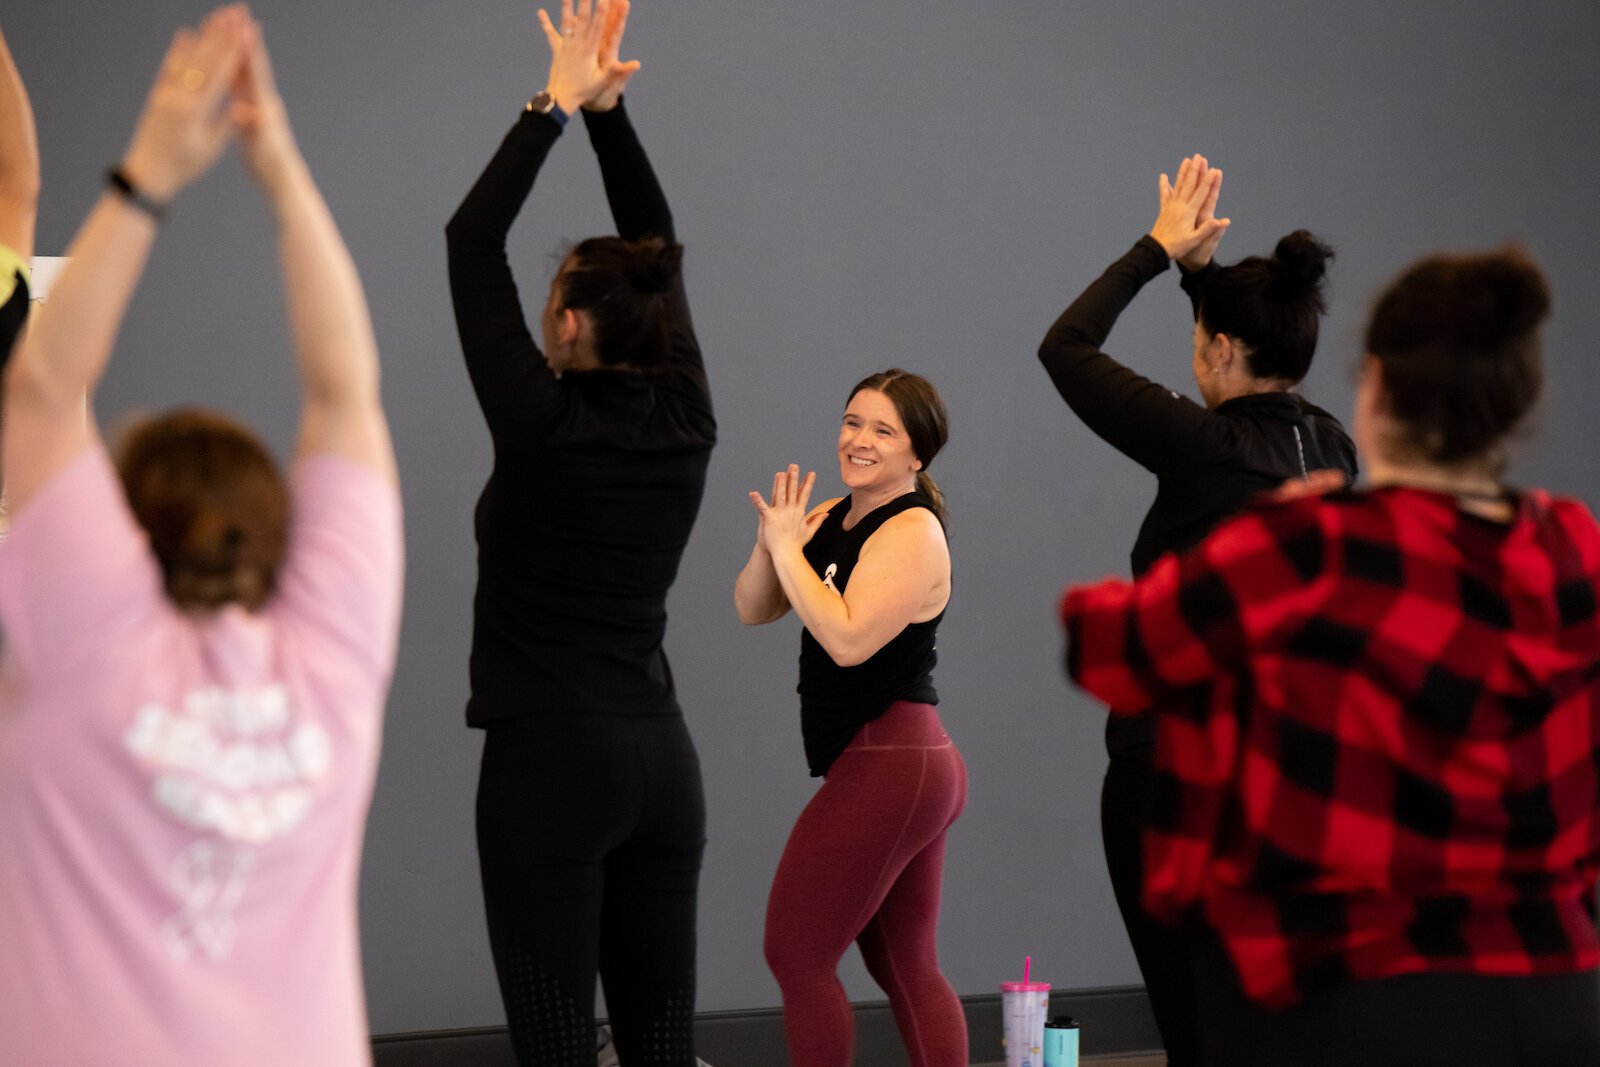 Chelsea Vona leads a class for Discover Yoga Fort Wayne.